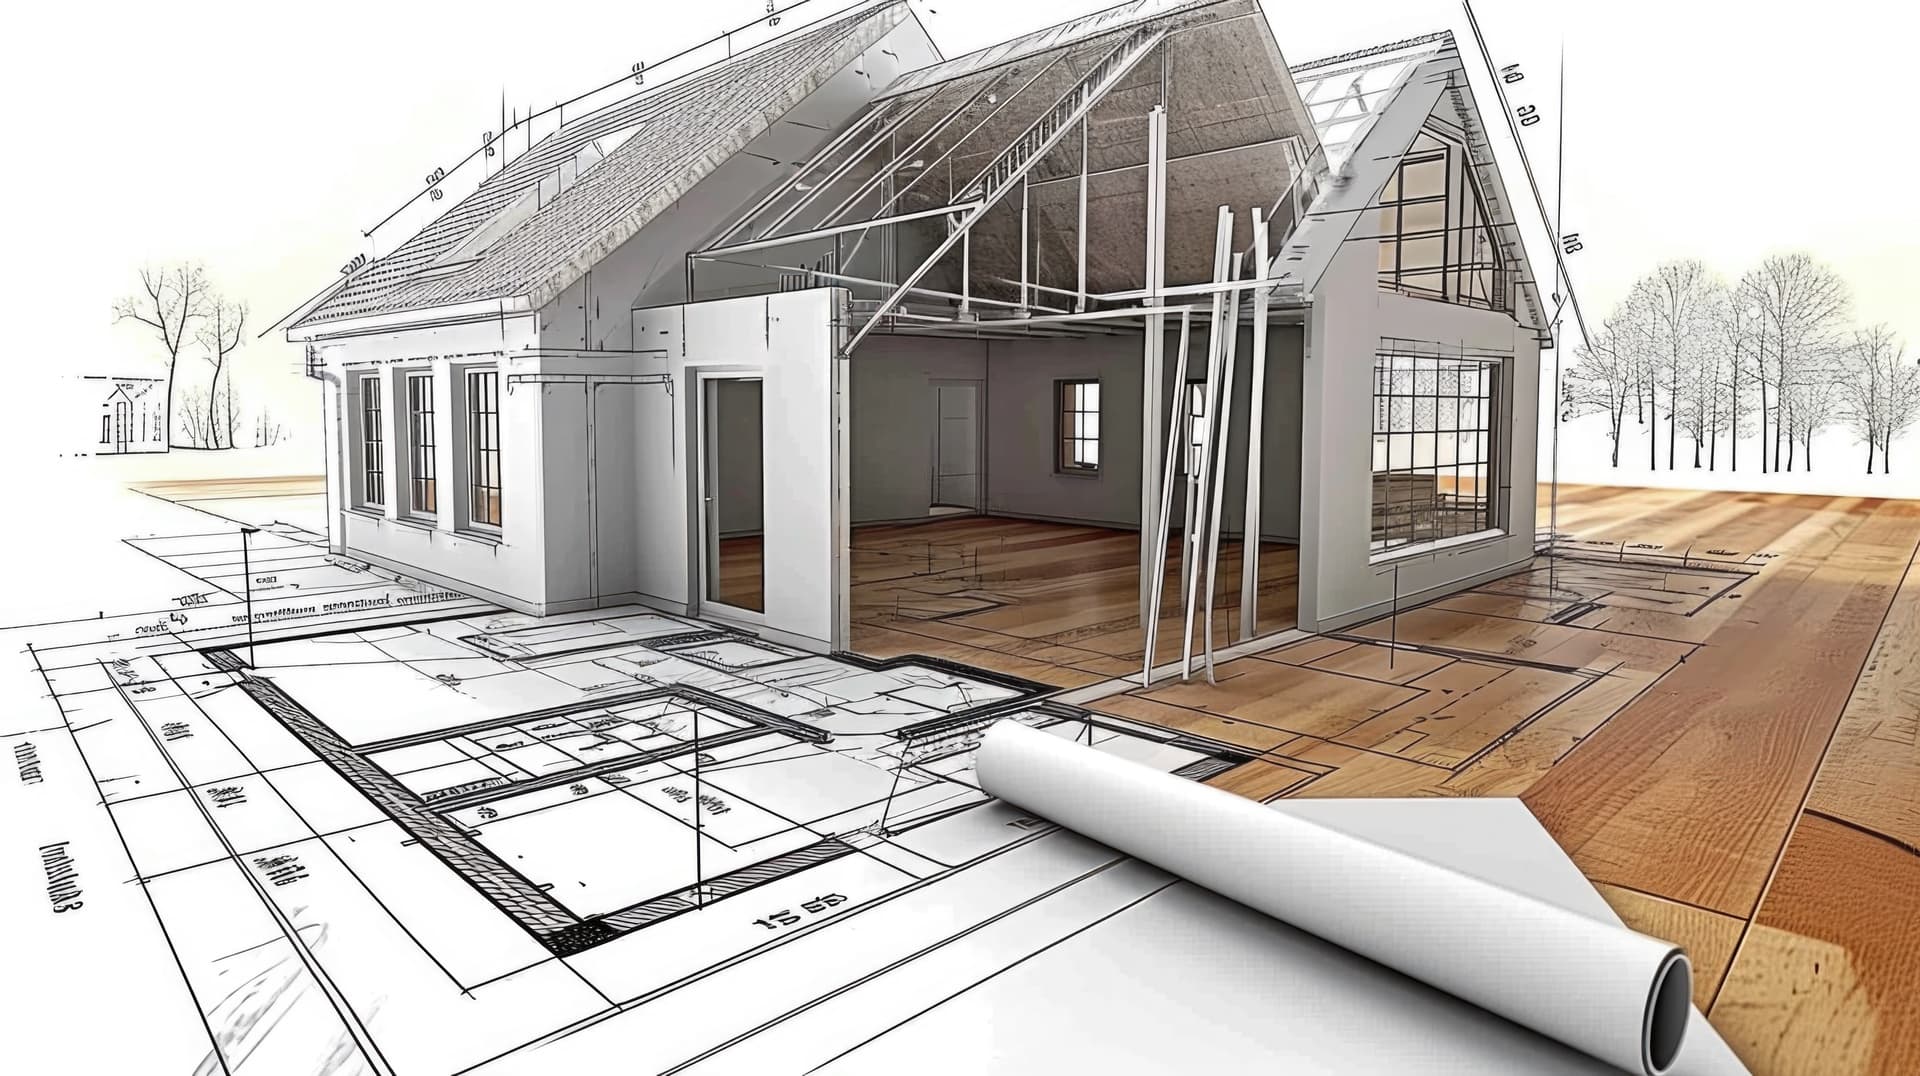 3D rendering of a house with blueprints on the floor.